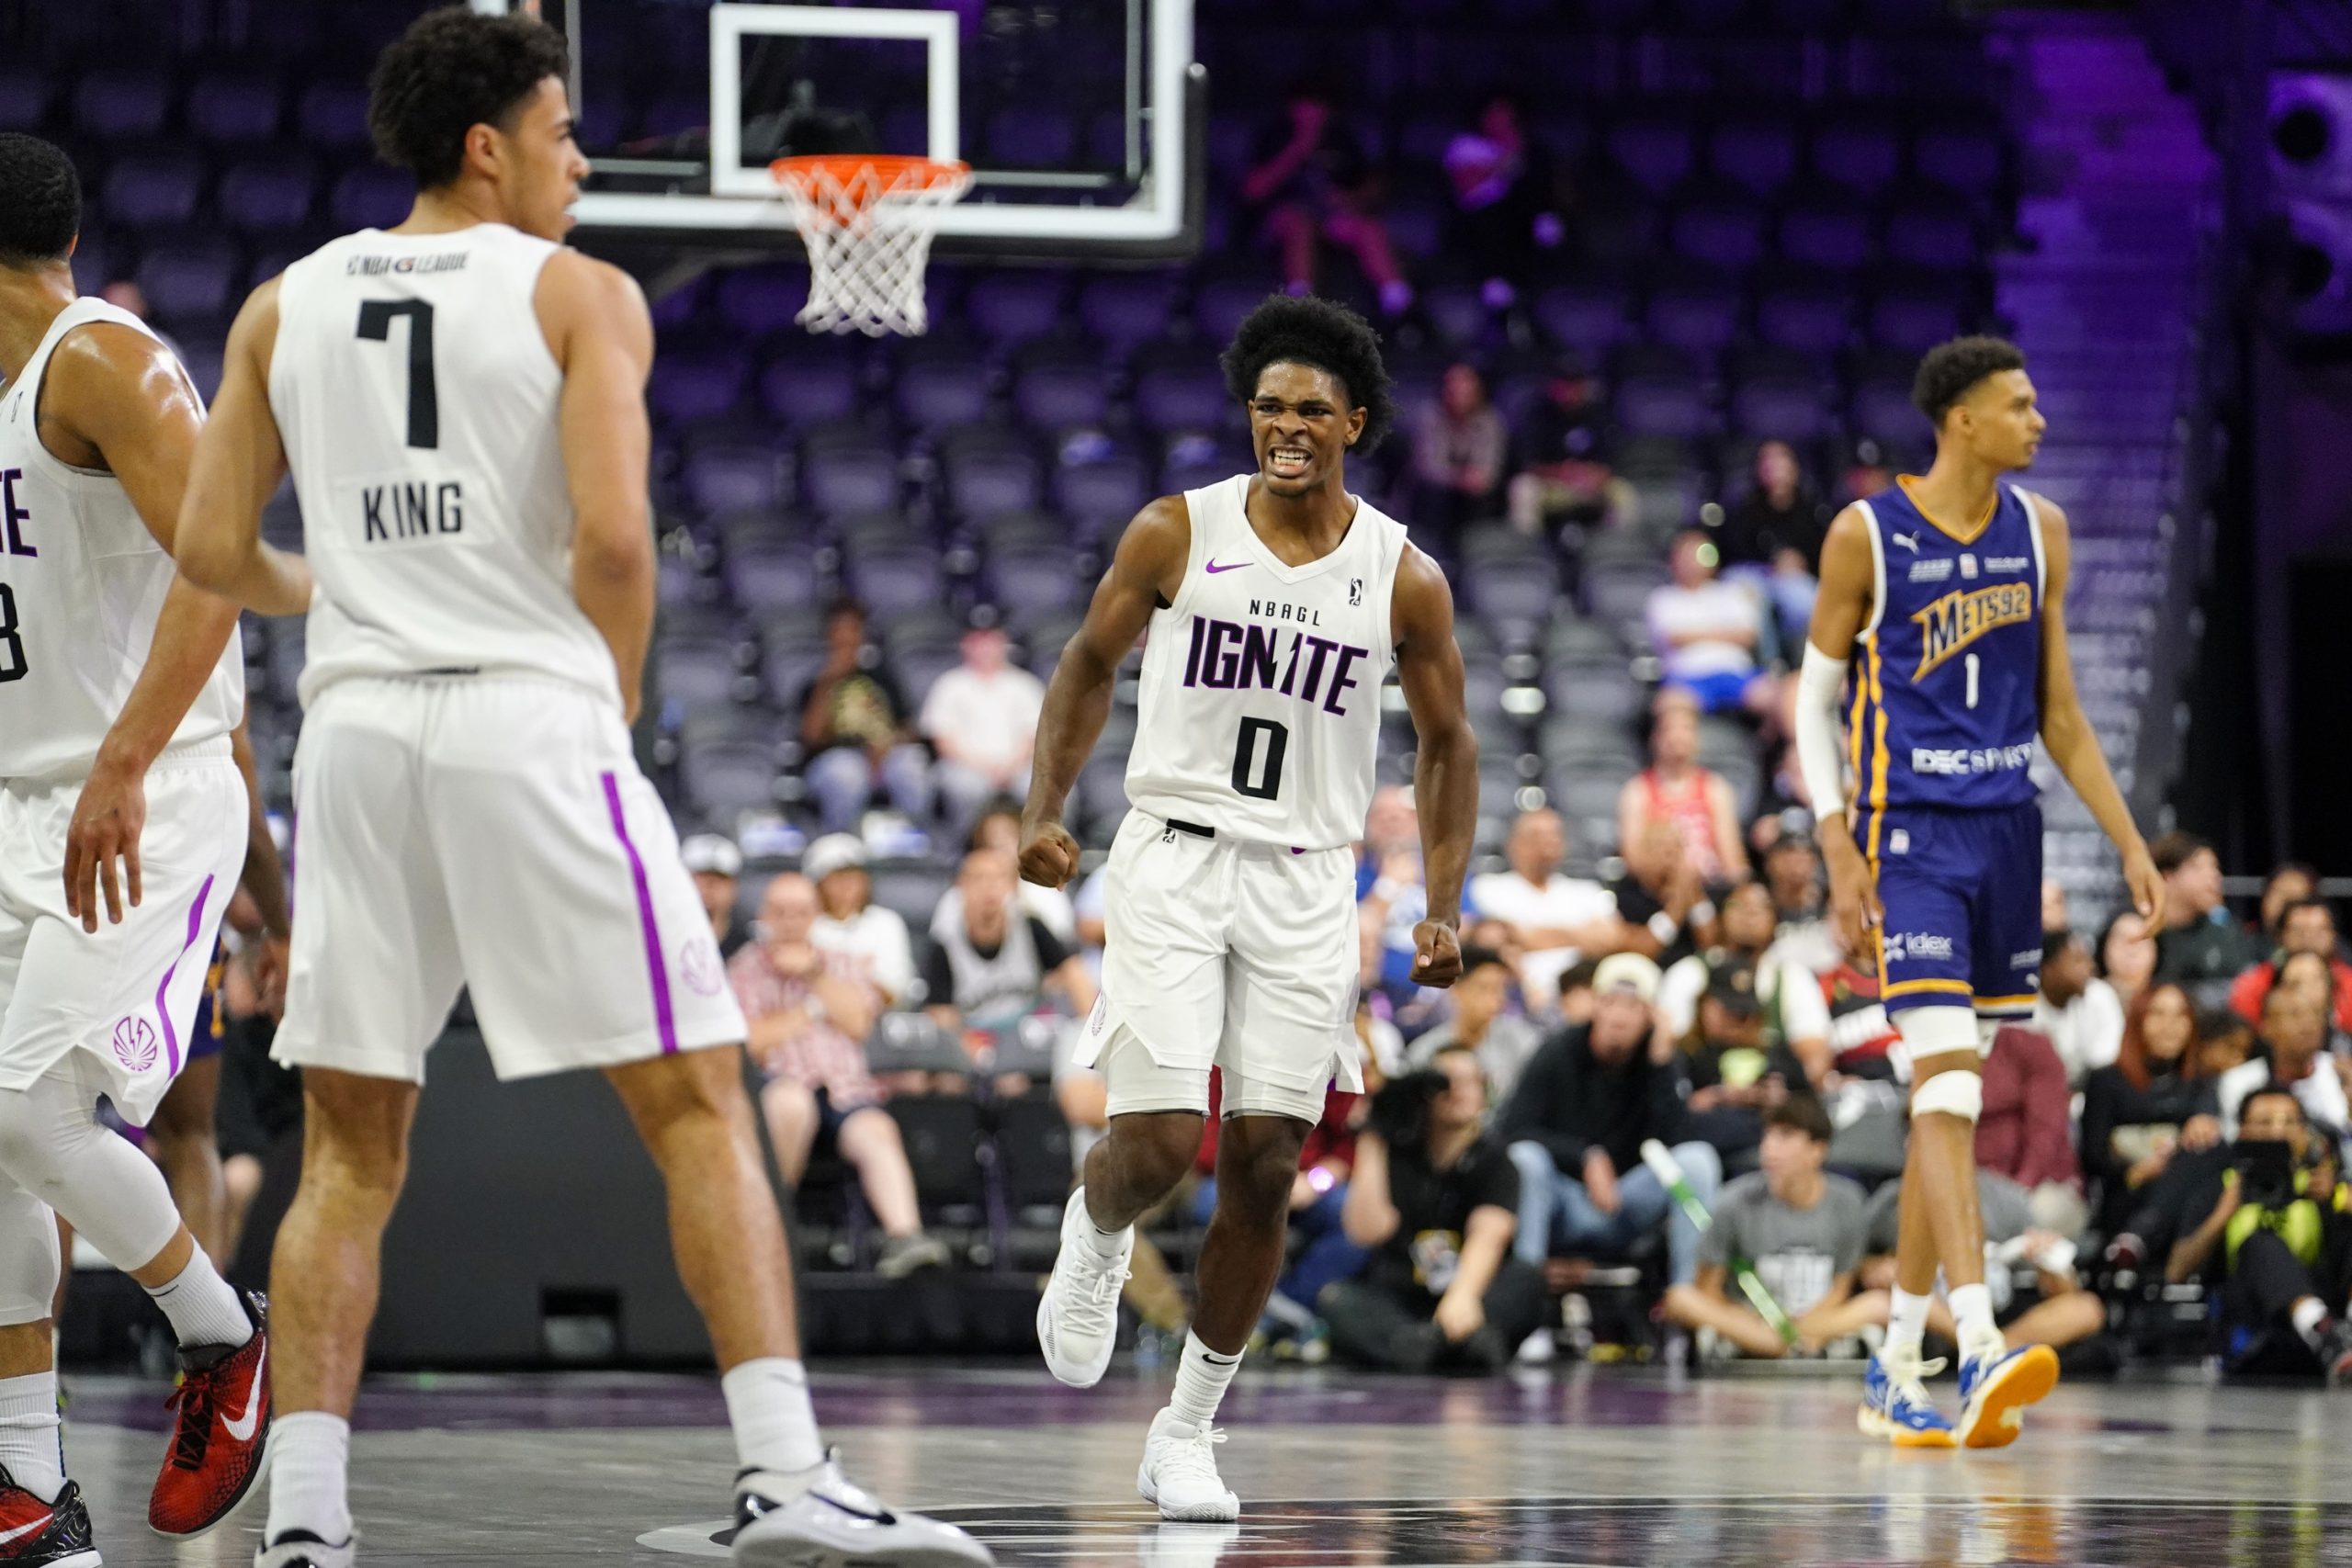 Oct 4, 2022; Henderson, NV, USA; NBA G League Ignite guard Scoot Henderson (0) reacts to a three-point score by guard Mojave King (7) against the Boulogne-Levallois Metropolitans 92 during the third quarter at The Dollar Loan Center. Mandatory Credit: Lucas Peltier-USA TODAY Sports